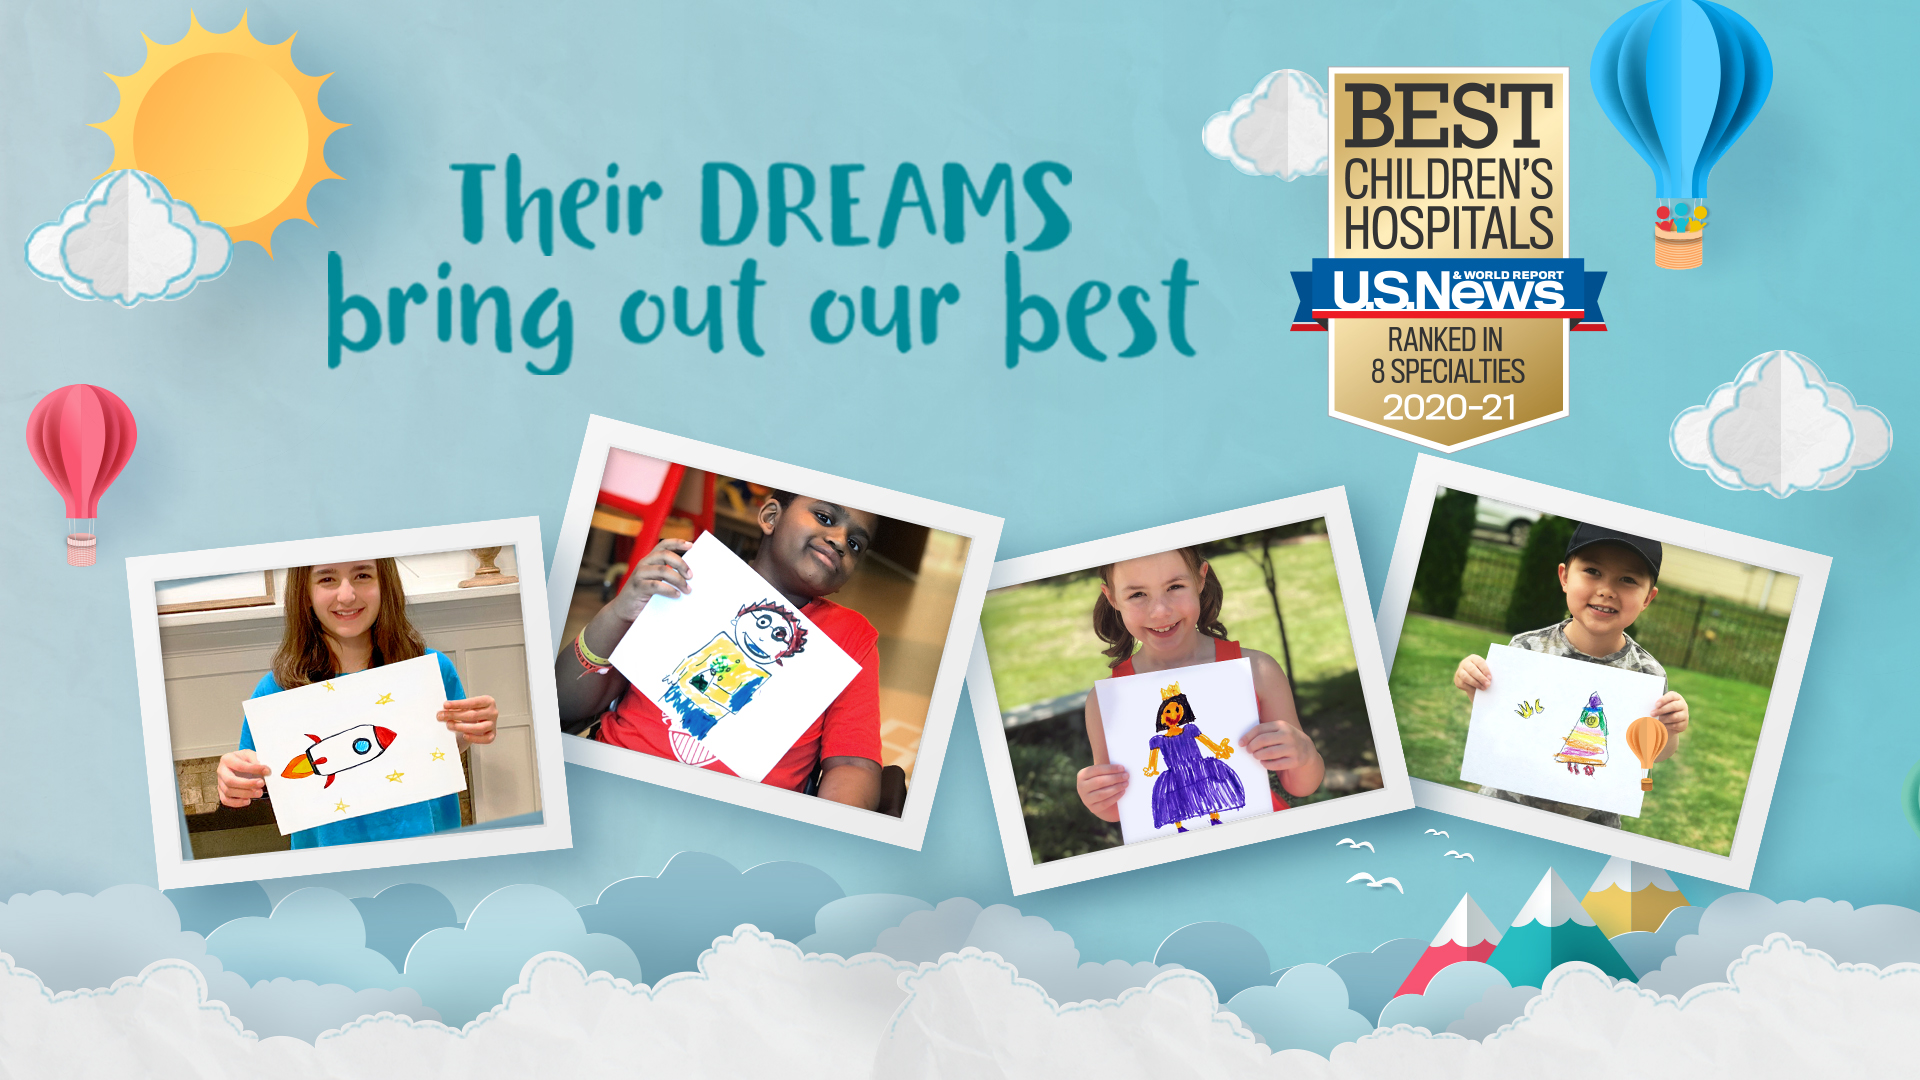 Atrium Health S Levine Children S Hospital Named A Best Children S Hospital For 13th Consecutive Year